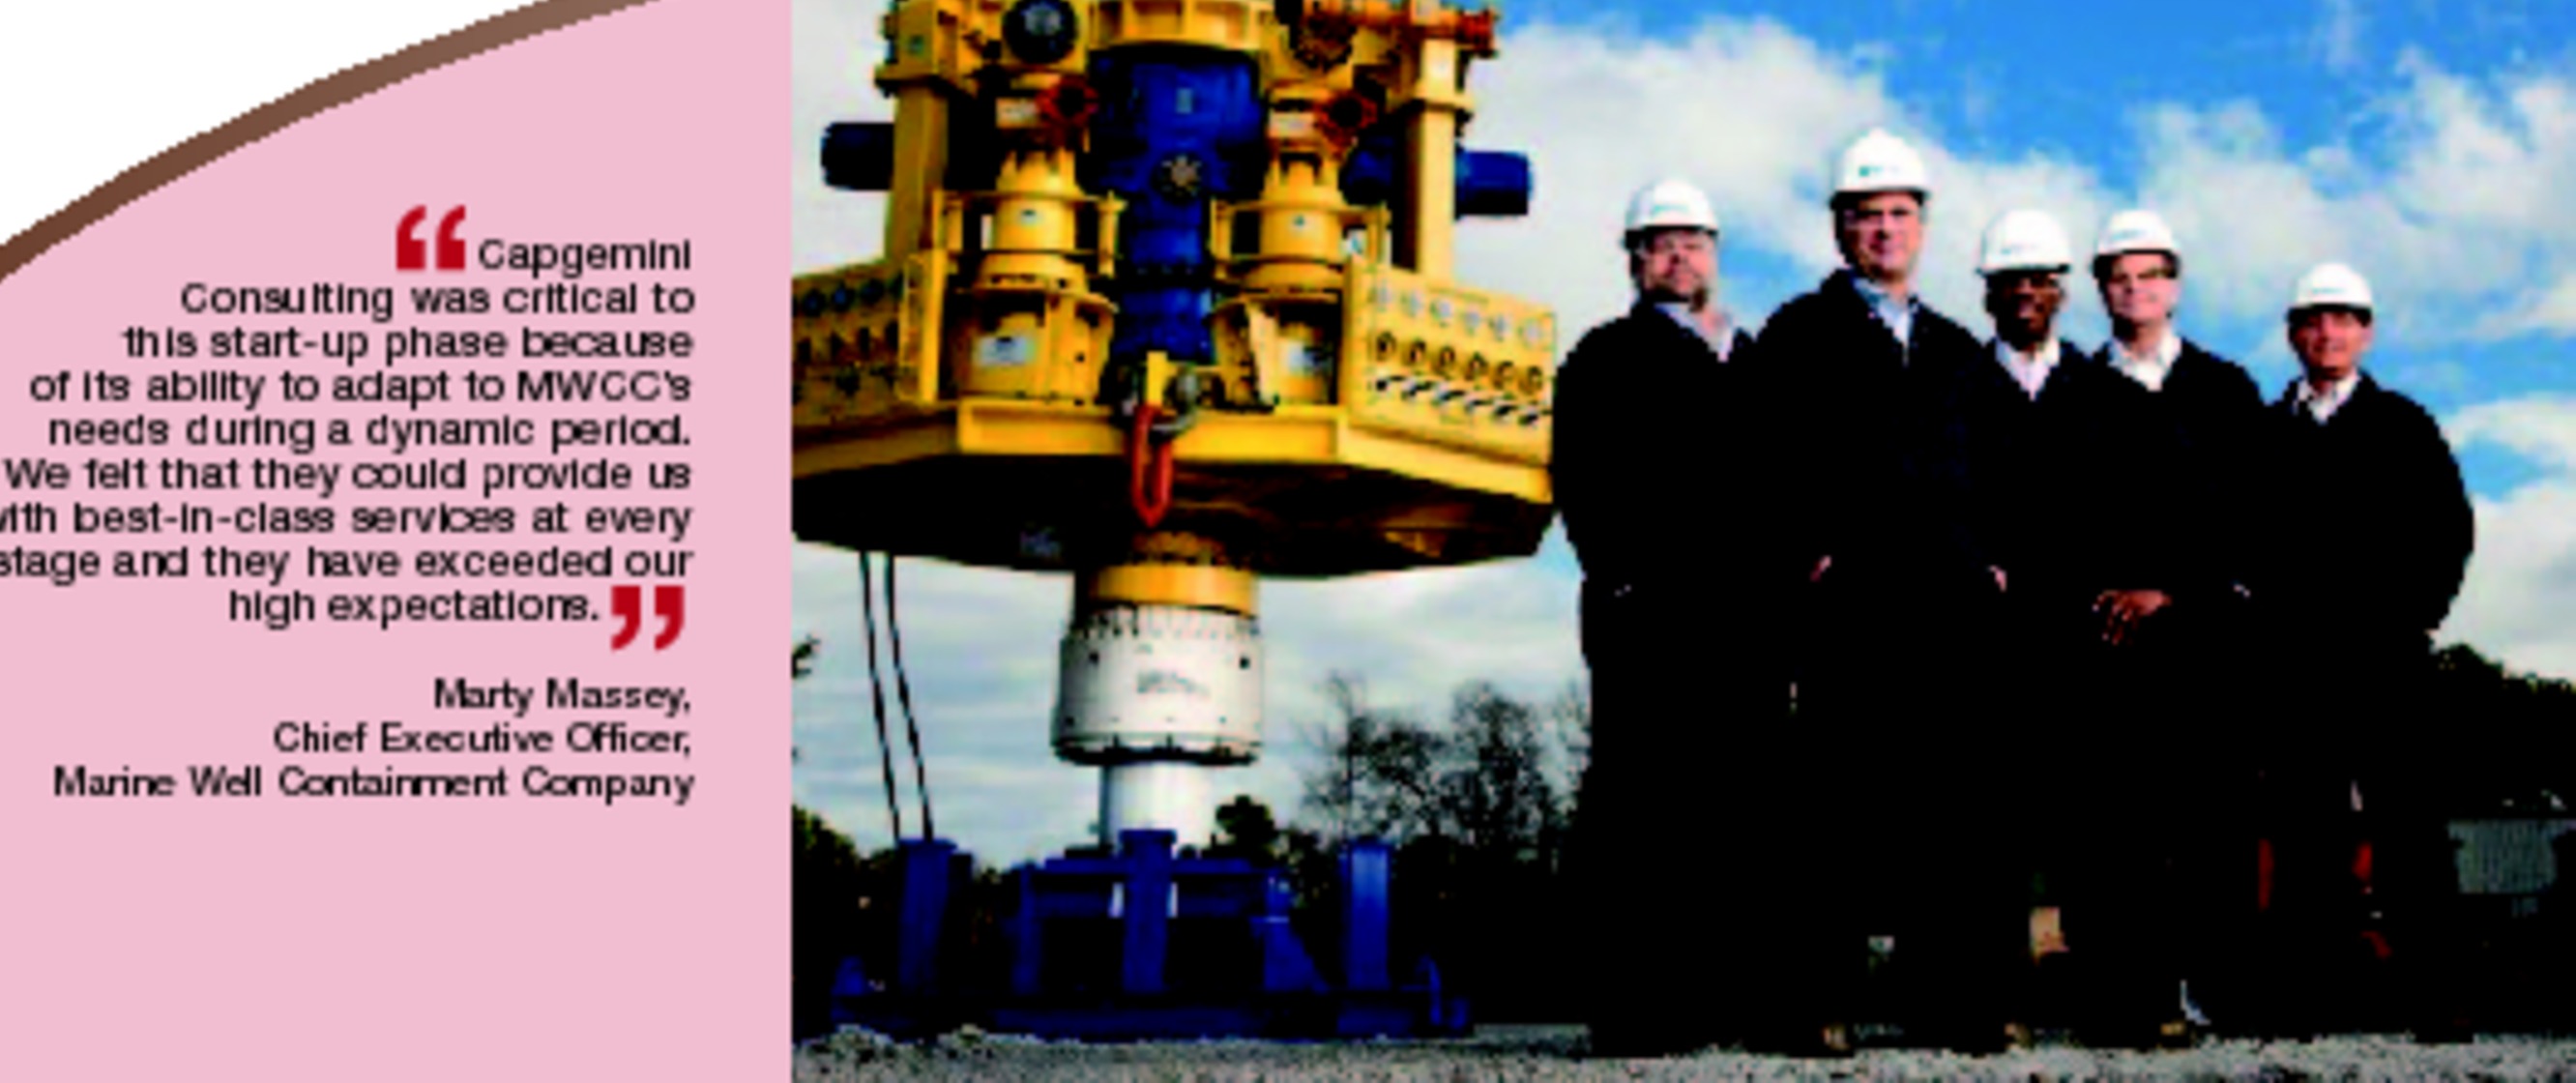 ss_Capgemini_Consulting_Helps_to_Launch_Marine_Well_Containment_Company_Putting_the_Oil_and_Gas_Industry_Back_to_Work